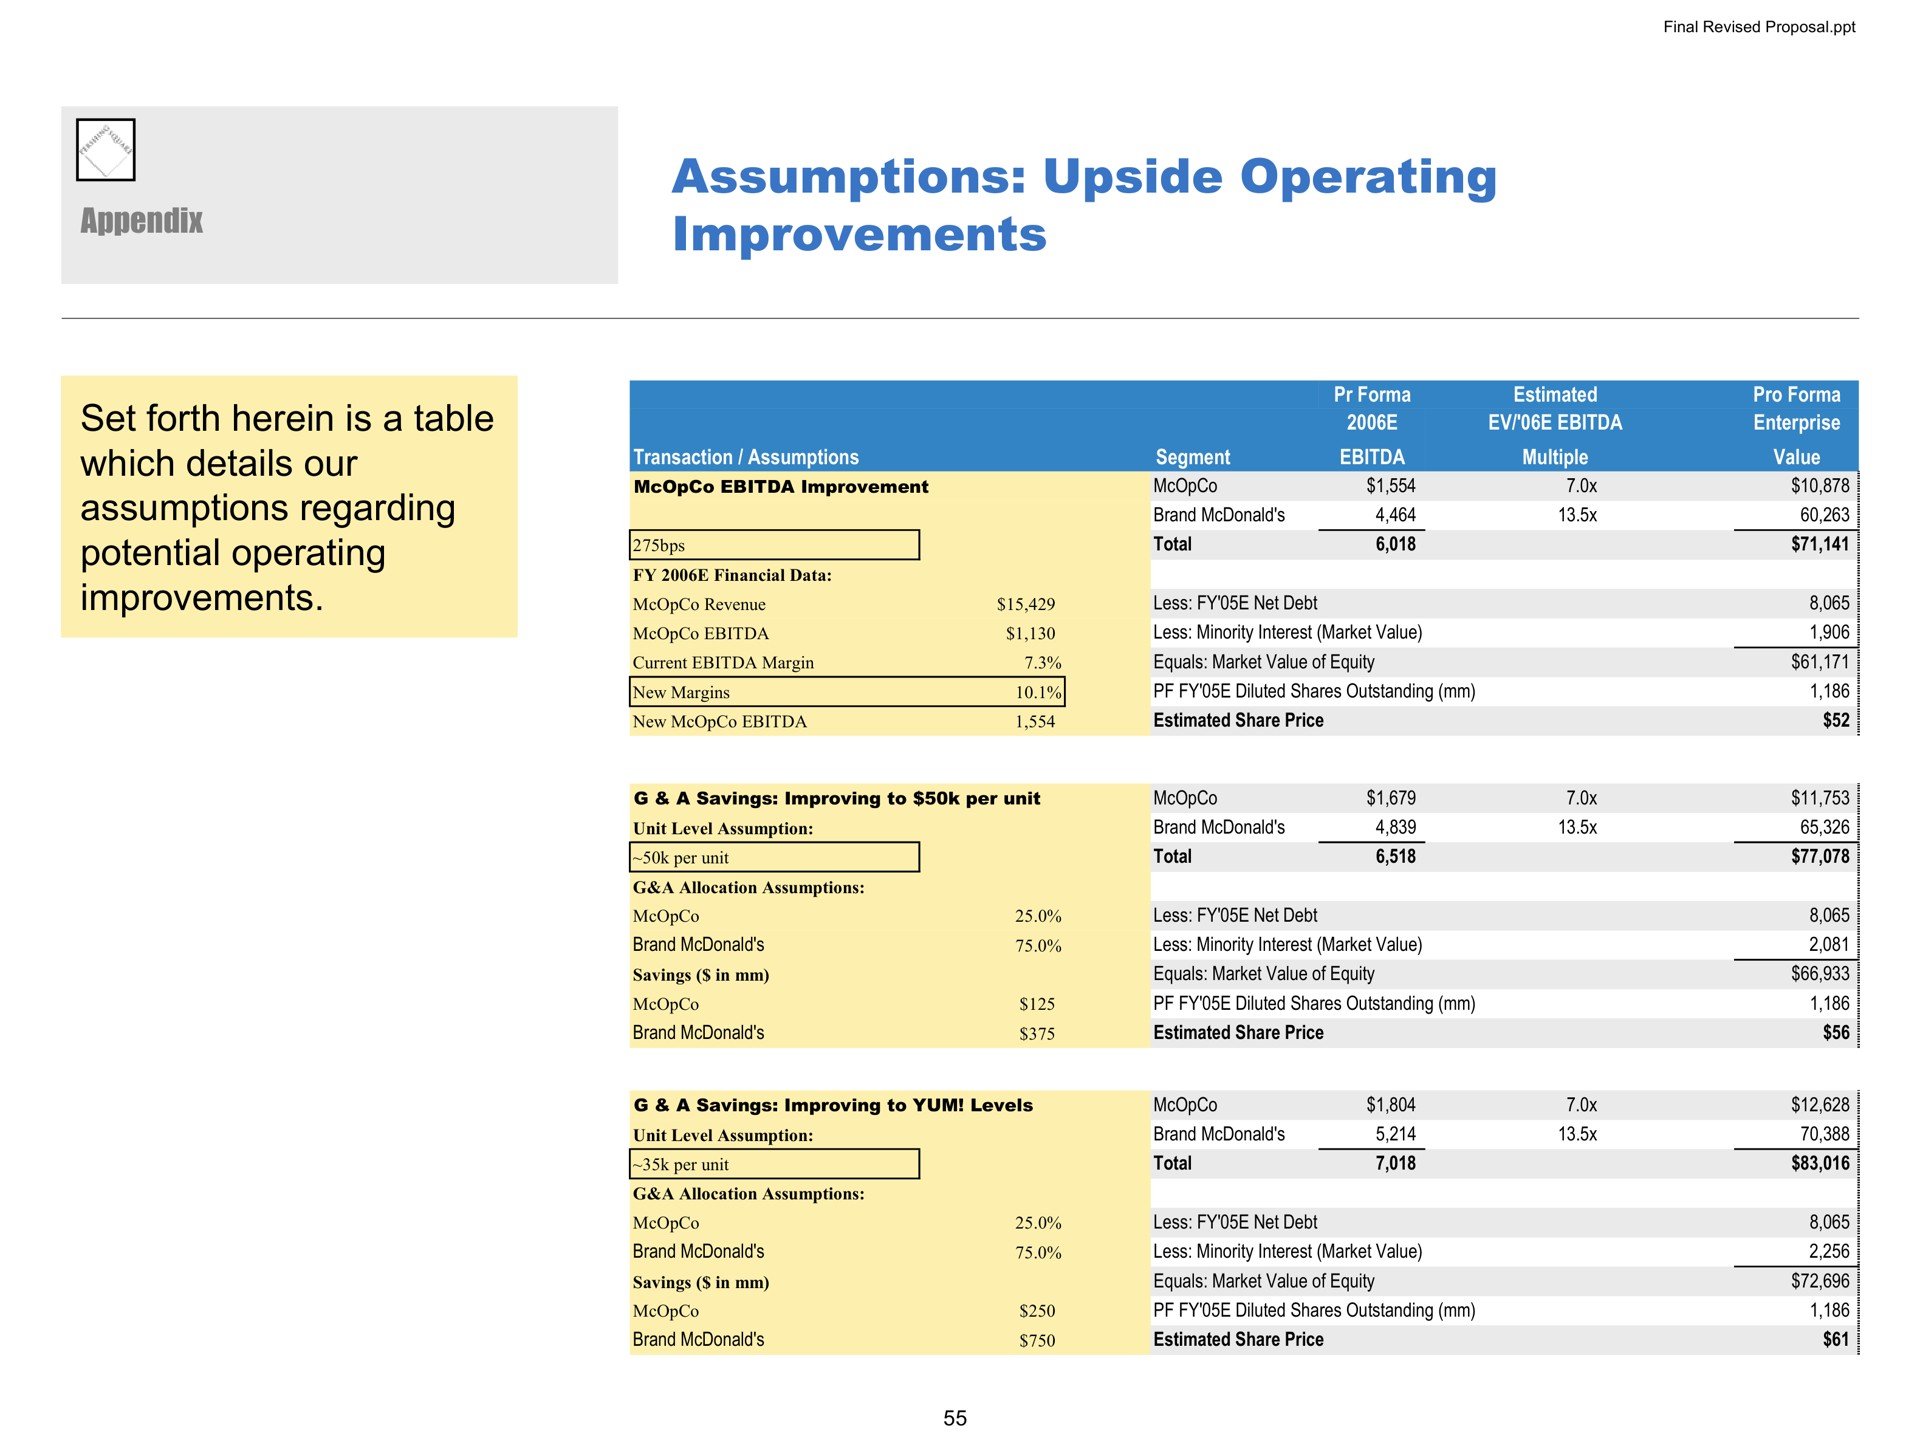 assumptions upside operating improvements set forth herein is a table which details our assumptions regarding potential operating improvements | Pershing Square